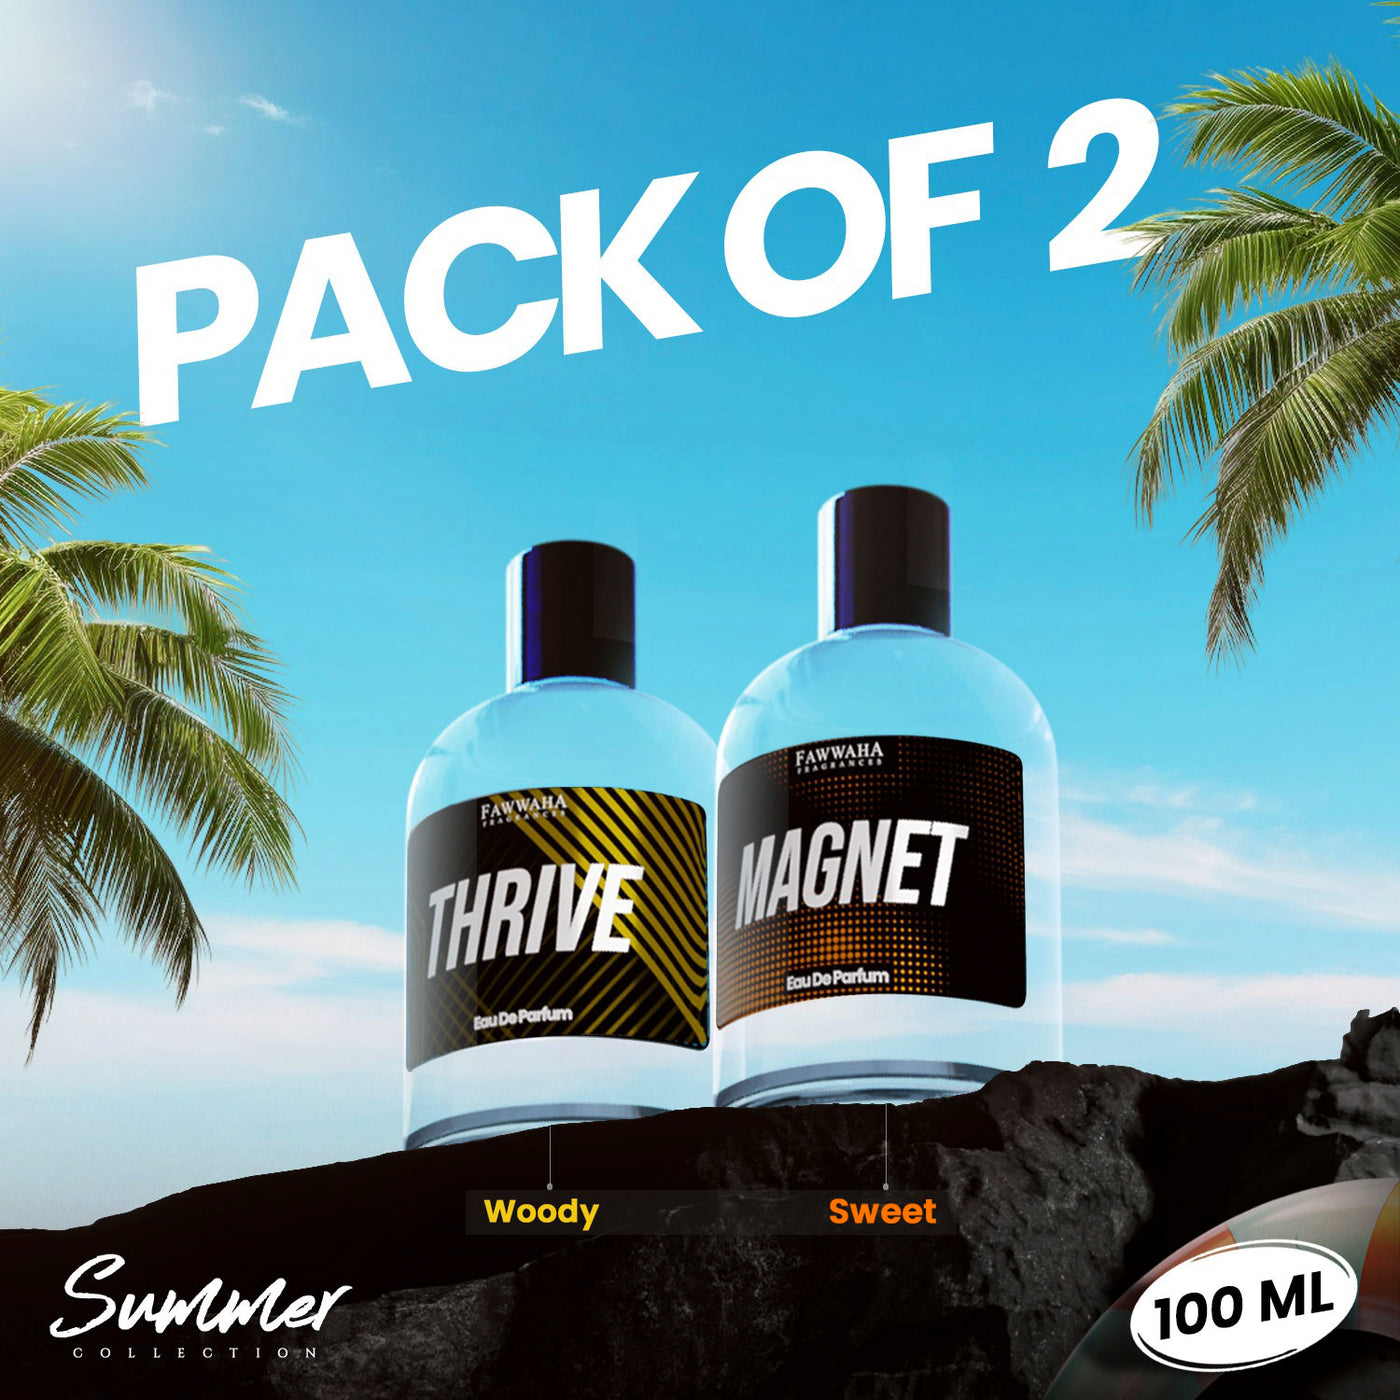 PACK OF 2 DEAL (SUMMER COLLECTION)- 100 ML